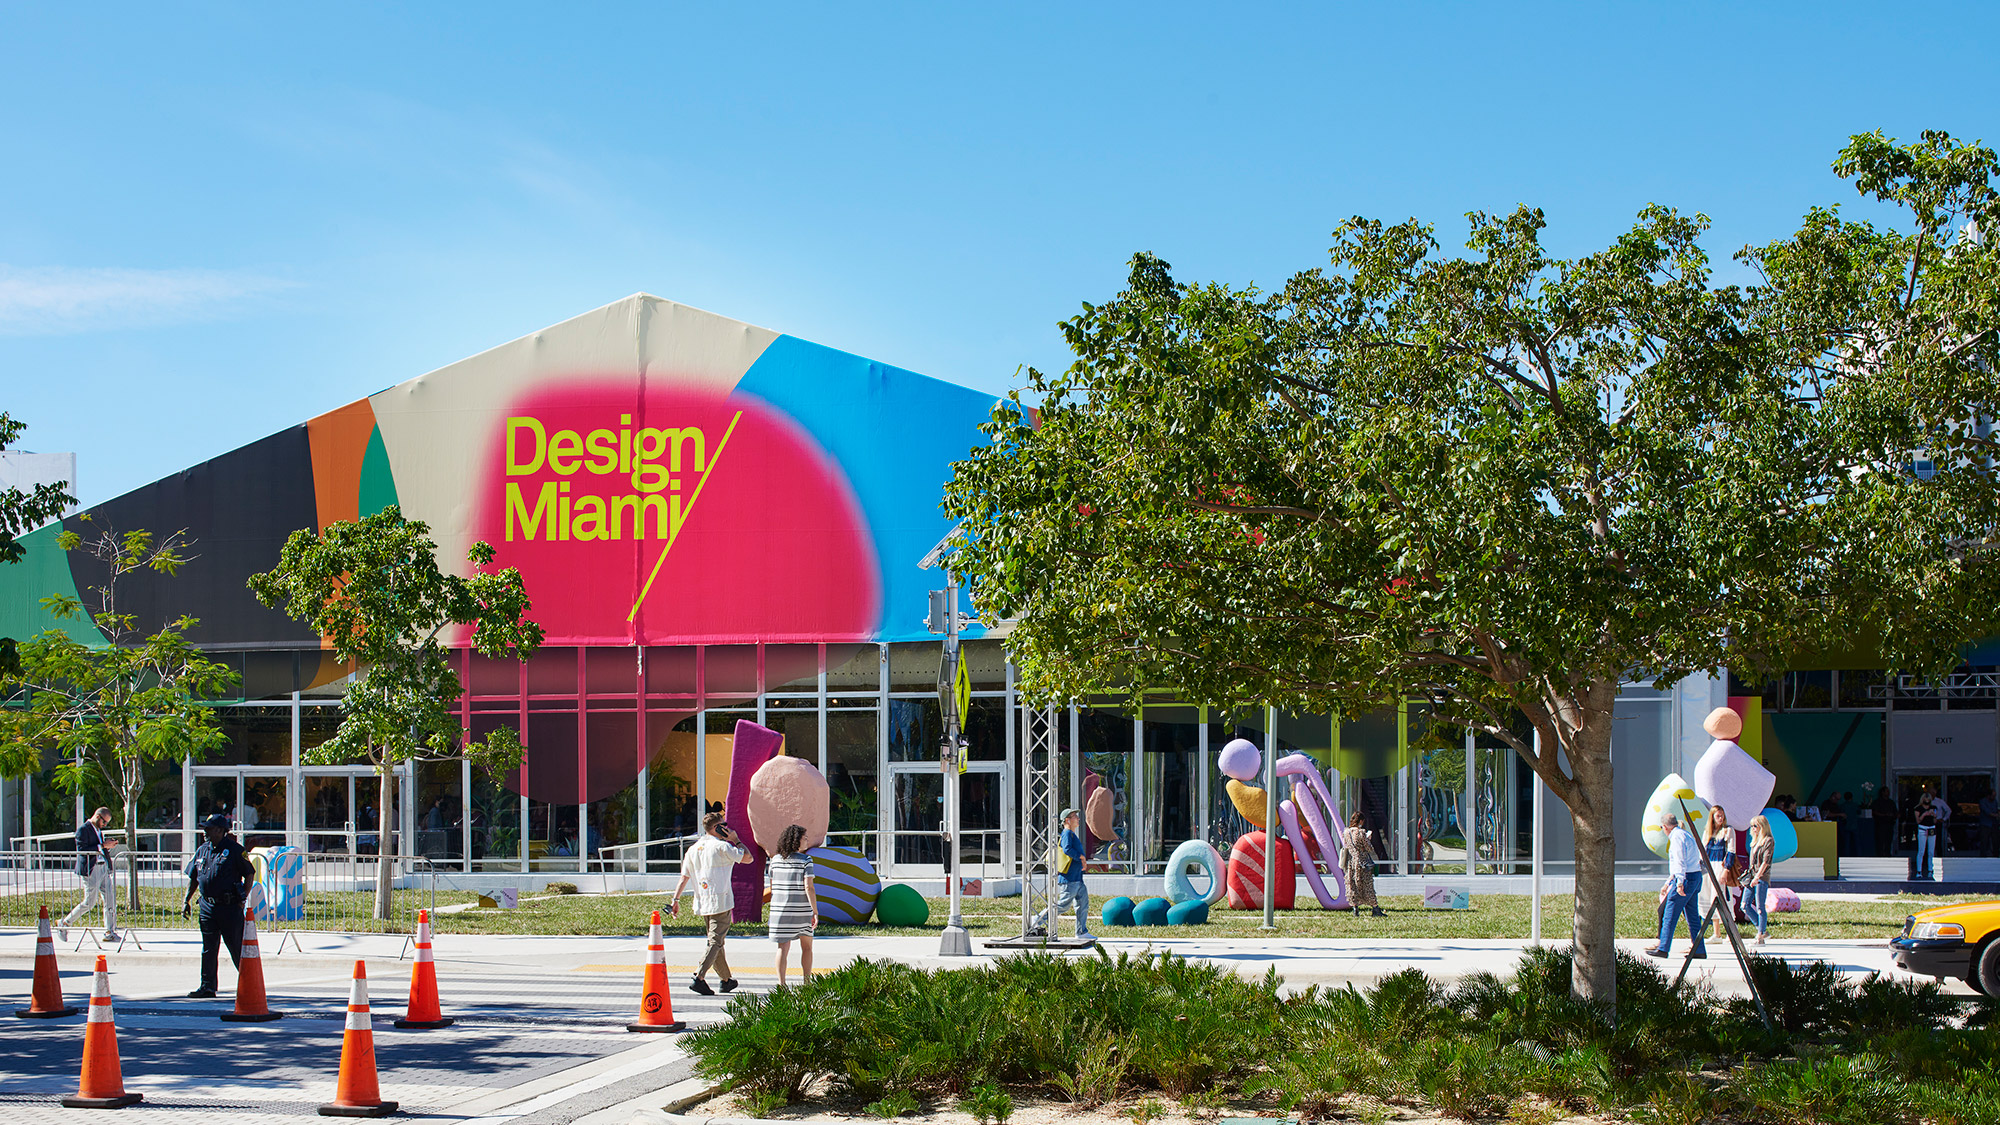 A Guide To All The Installations & Exhibits Coming To Miami Design